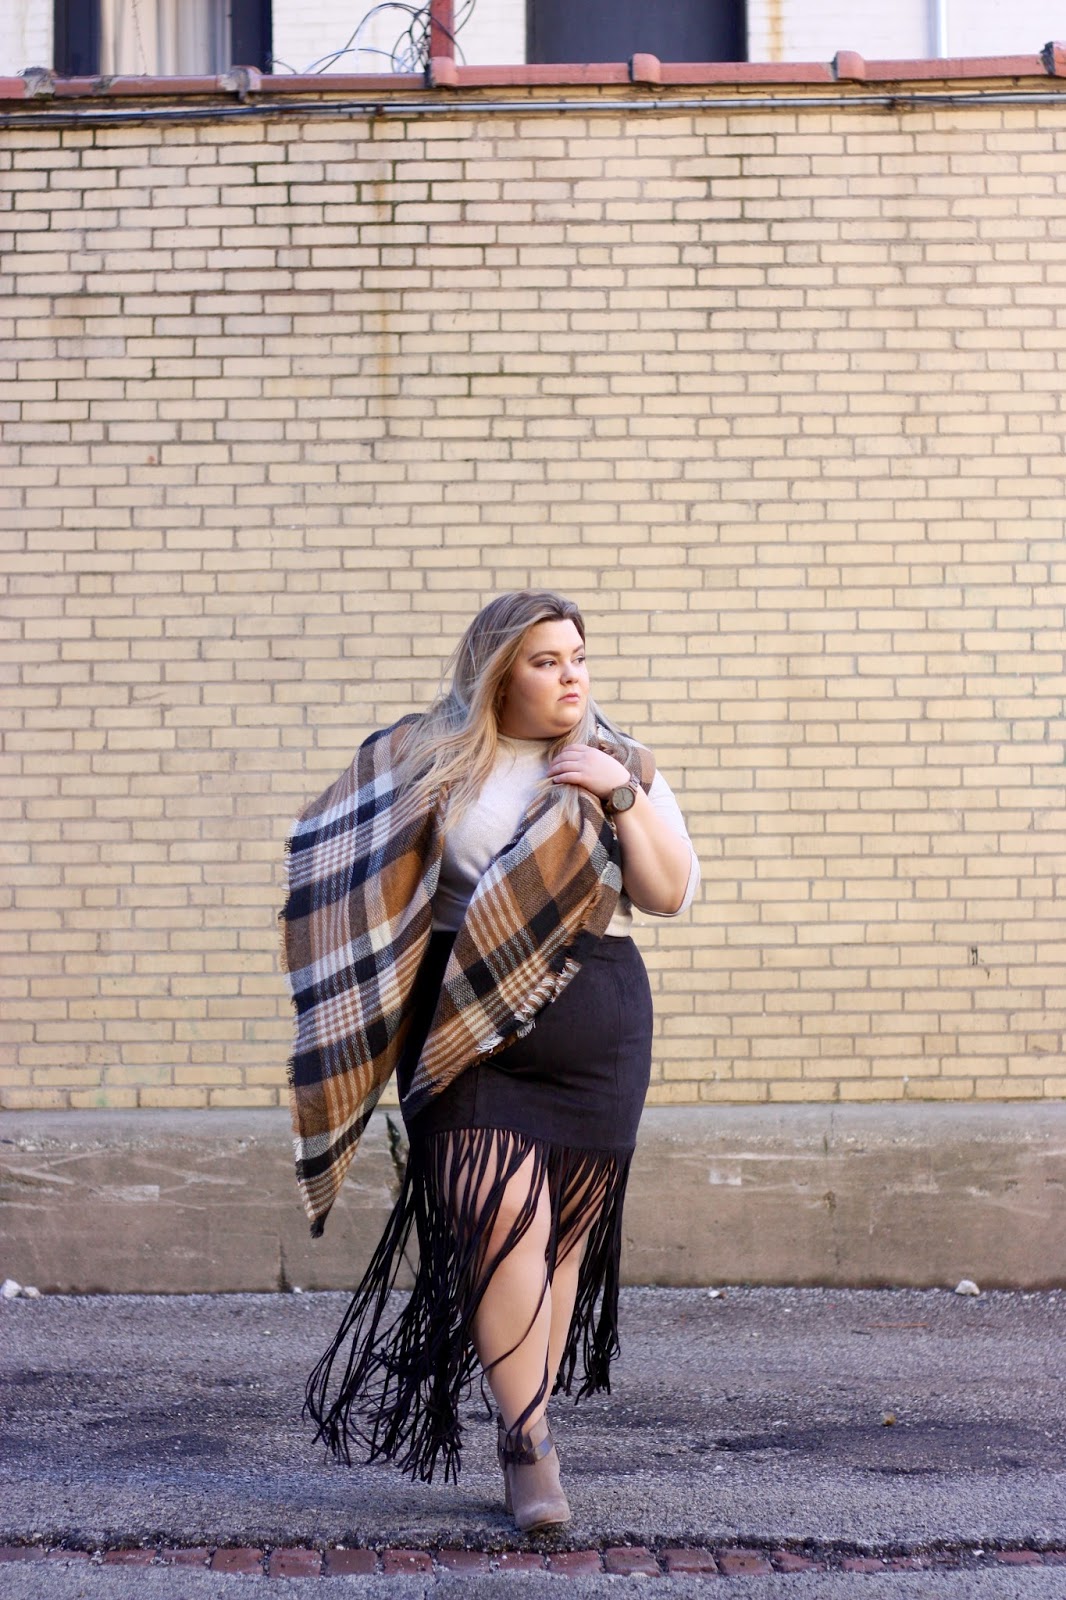 Jord Watches, womens wood watches, natalie craig, natalie in the city, fashion to figure, fringe, plus size fringe skirt, plus size fashion blogger, chicago blogger, midwest blogger, full figured, ft., blanket scarf,